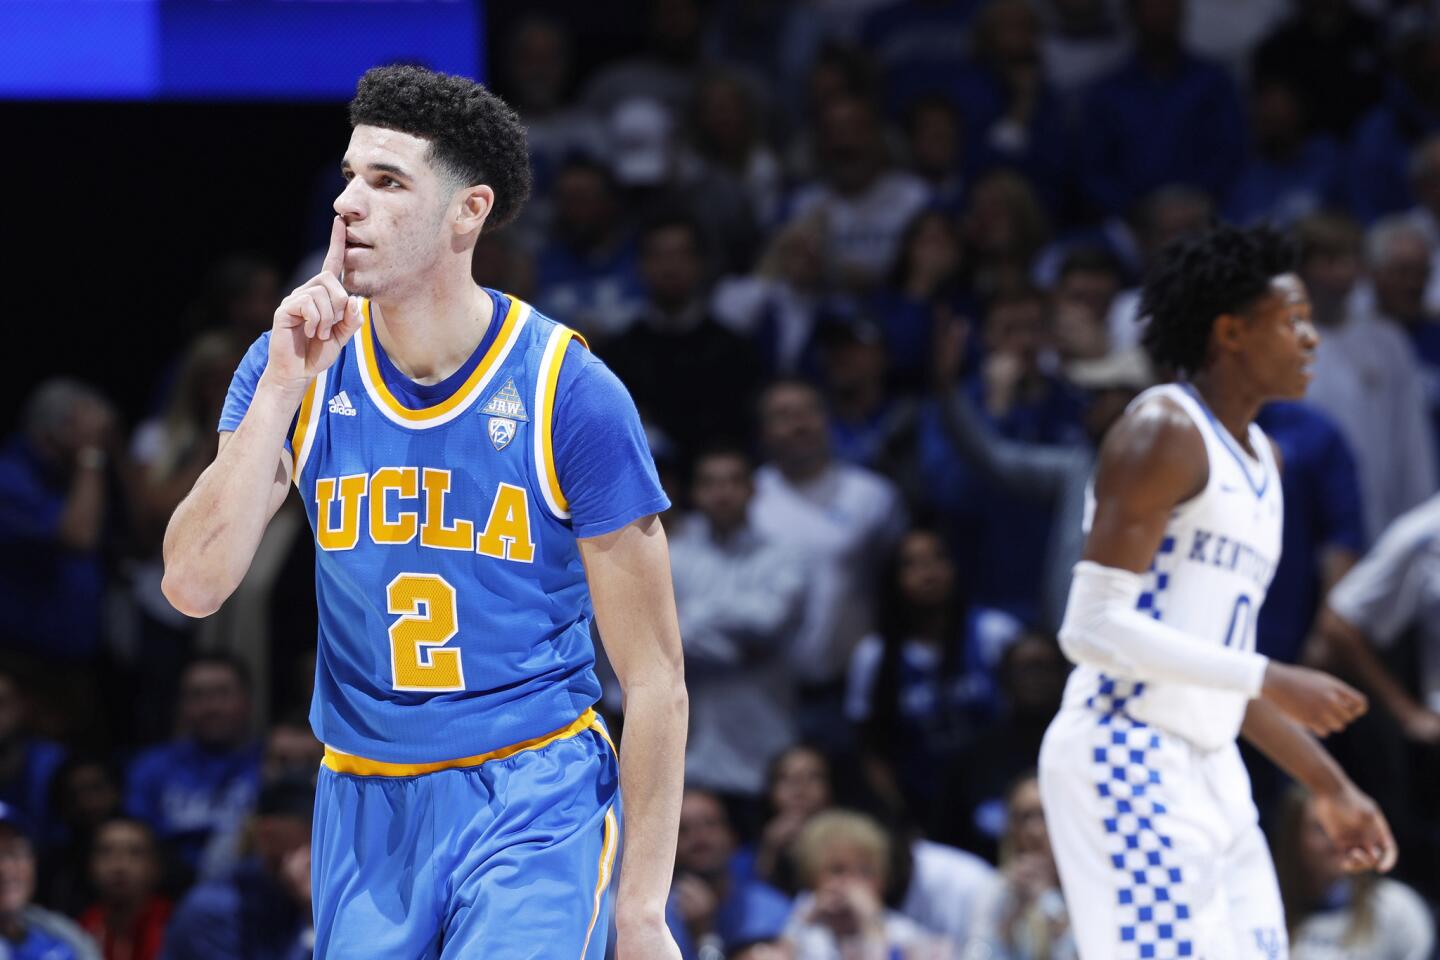 UCLA guard Lonzo Ball reacts after making a three-point shot against Kentucky during the second half of their game on Dec. 3.